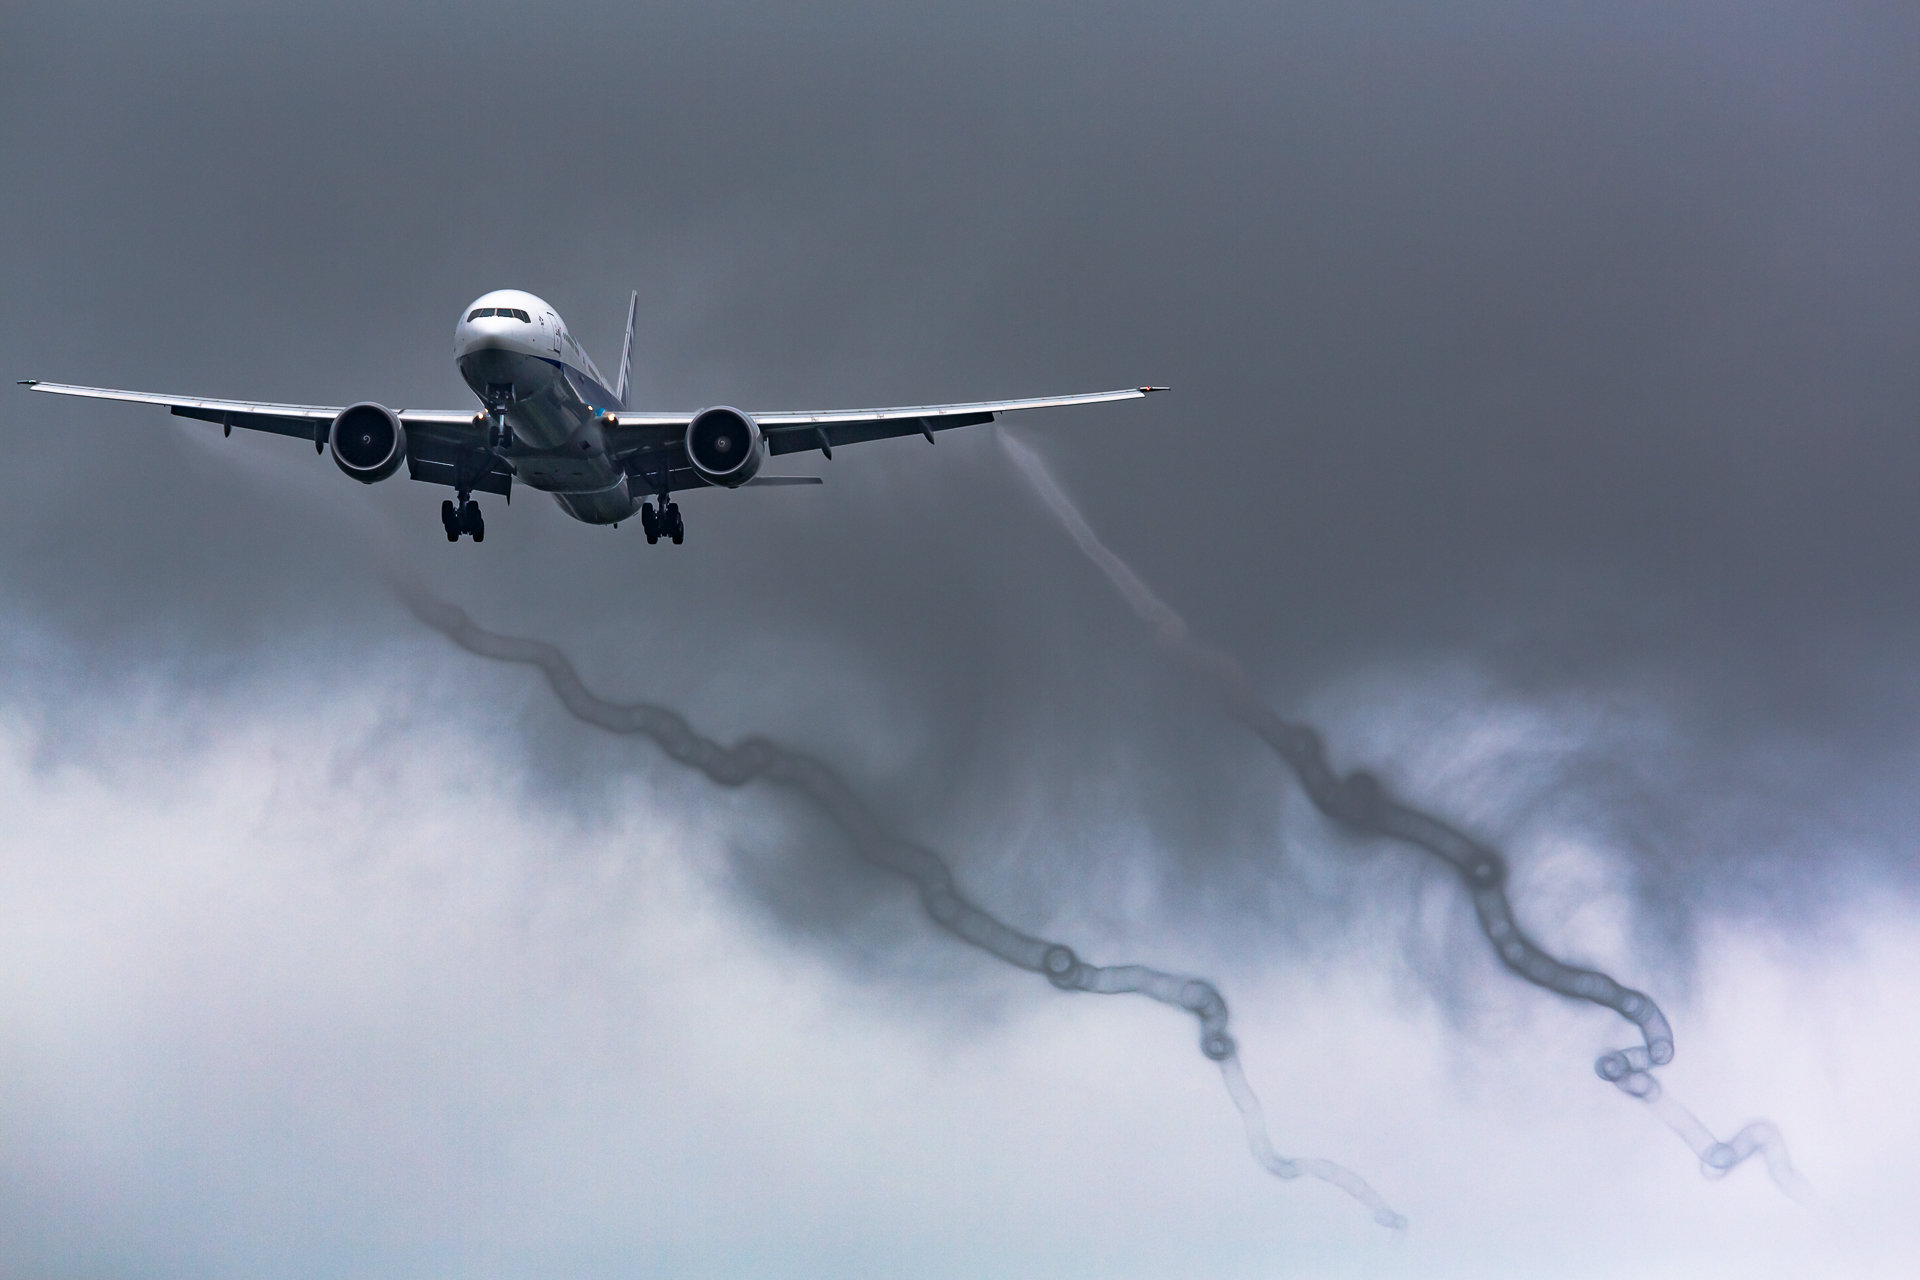 Wingtip vortices cause downwash which reduces the effective angle